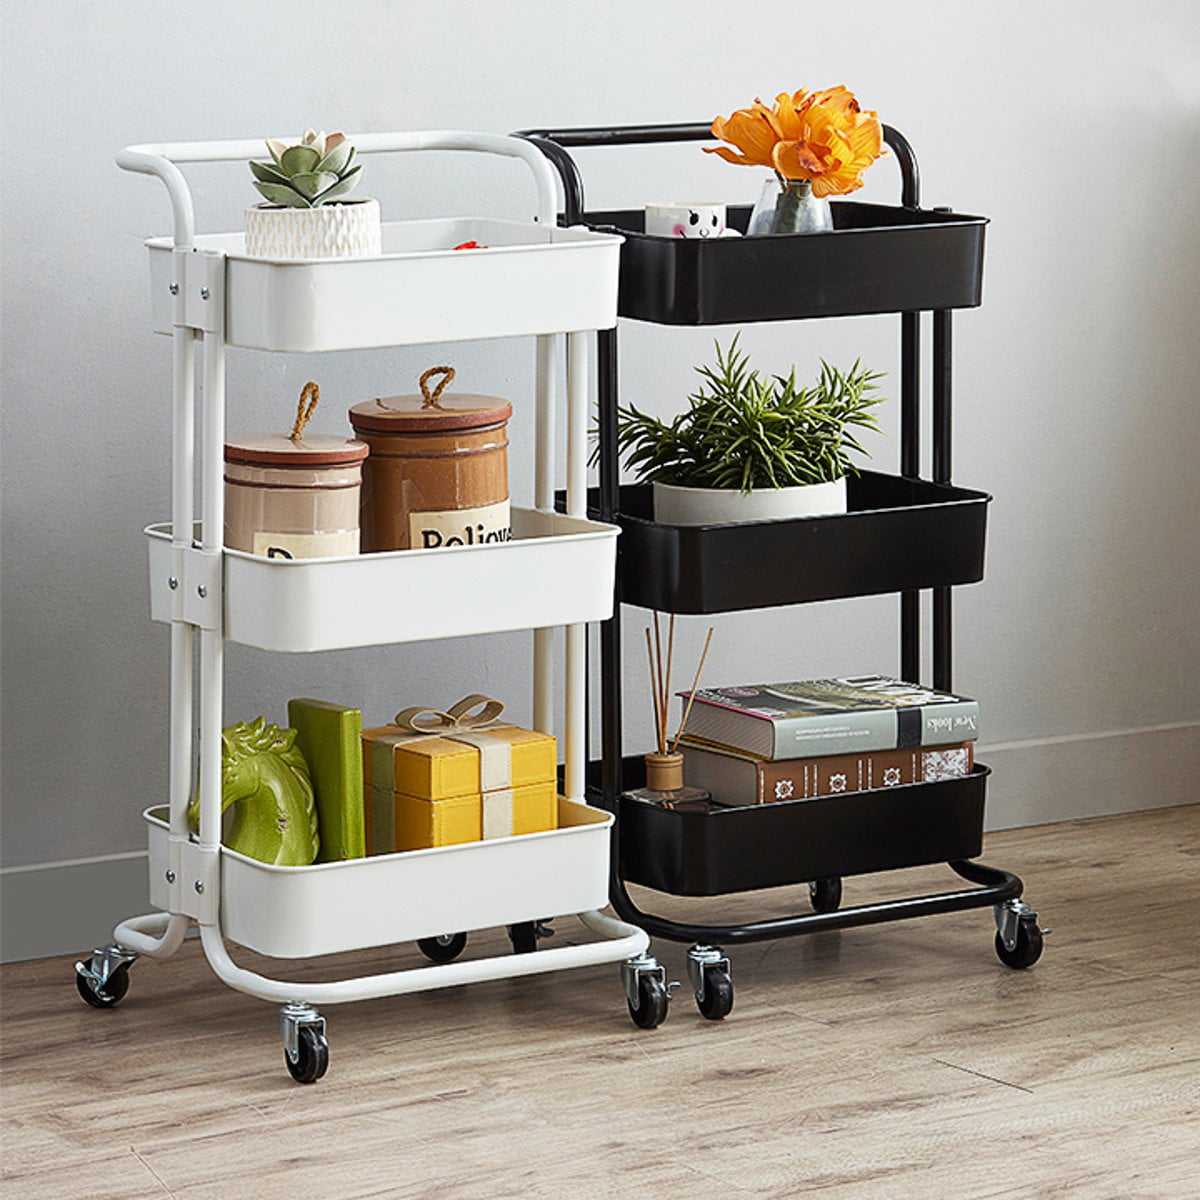 Happikids 3-Tier Rolling Utility Cart,Heavy Duty Storage Organizer Carts Shelves,Multifunction Storage Trolley Supply,Craft Roller with Lockable Wheels,Easy Assembly for Bathroom,Kitchen,Office,White 